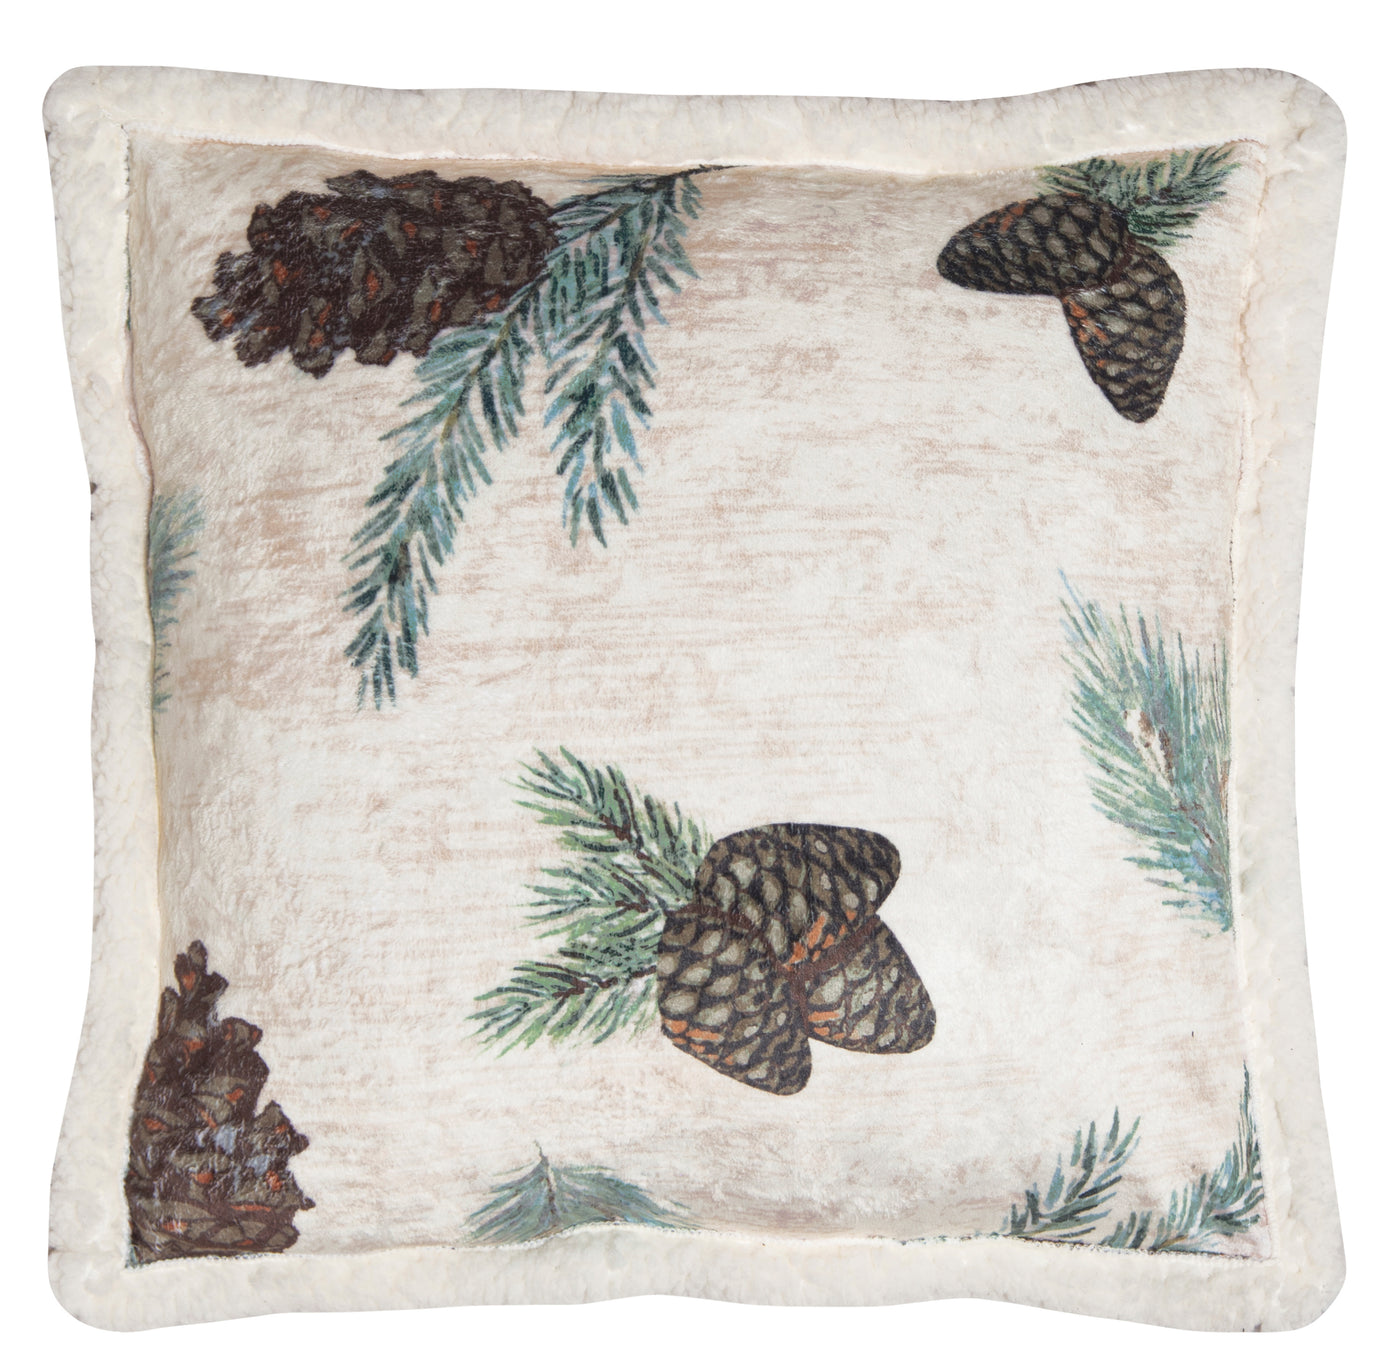 Pinecone Rustic Cabin Sherpa Throw Pillow – Rustics for Less